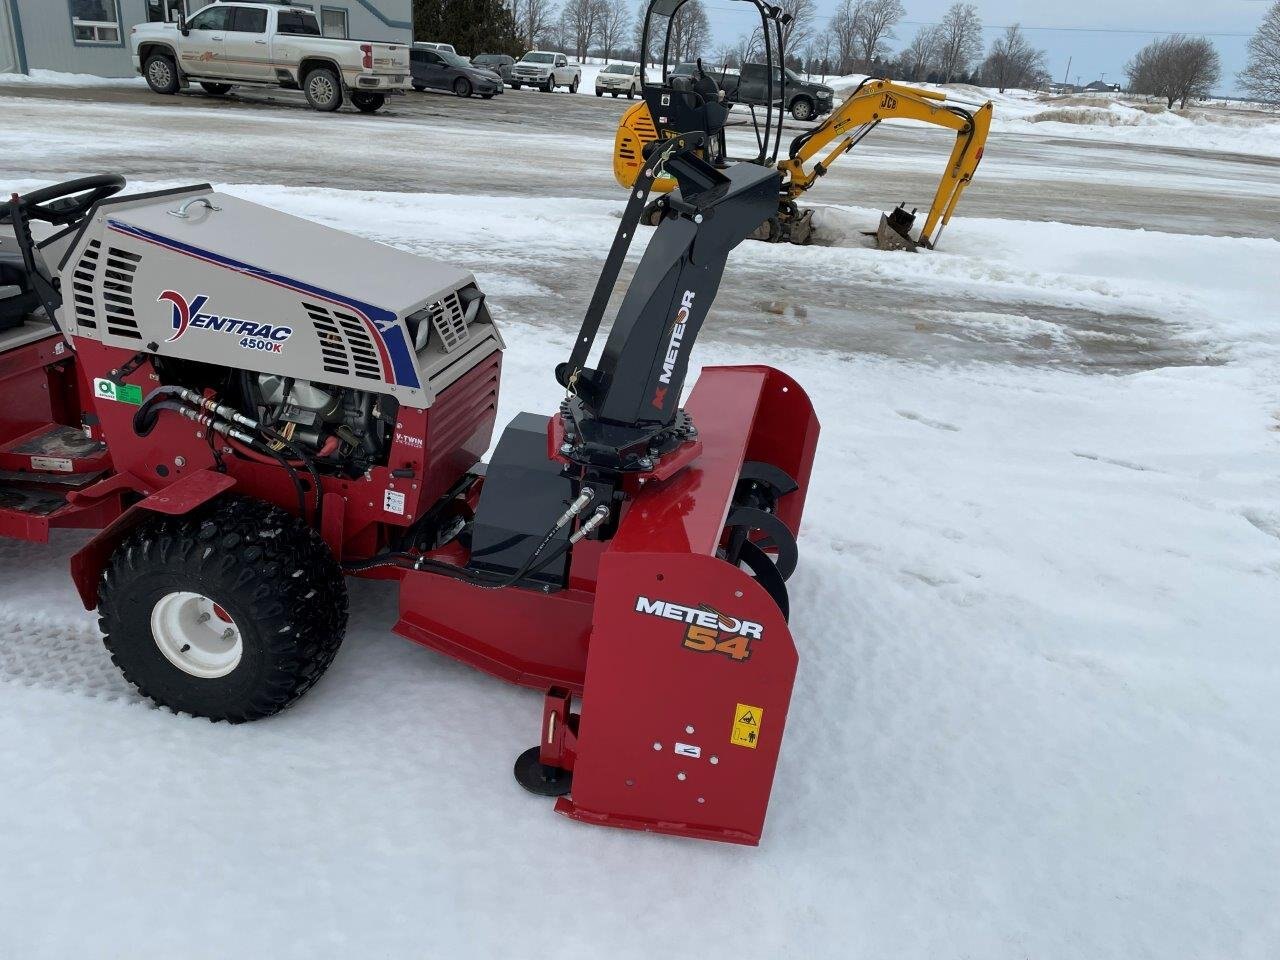 Meteor Snow Blower for Ventrac and Steiner, 54” width, Hyd Hood Turn